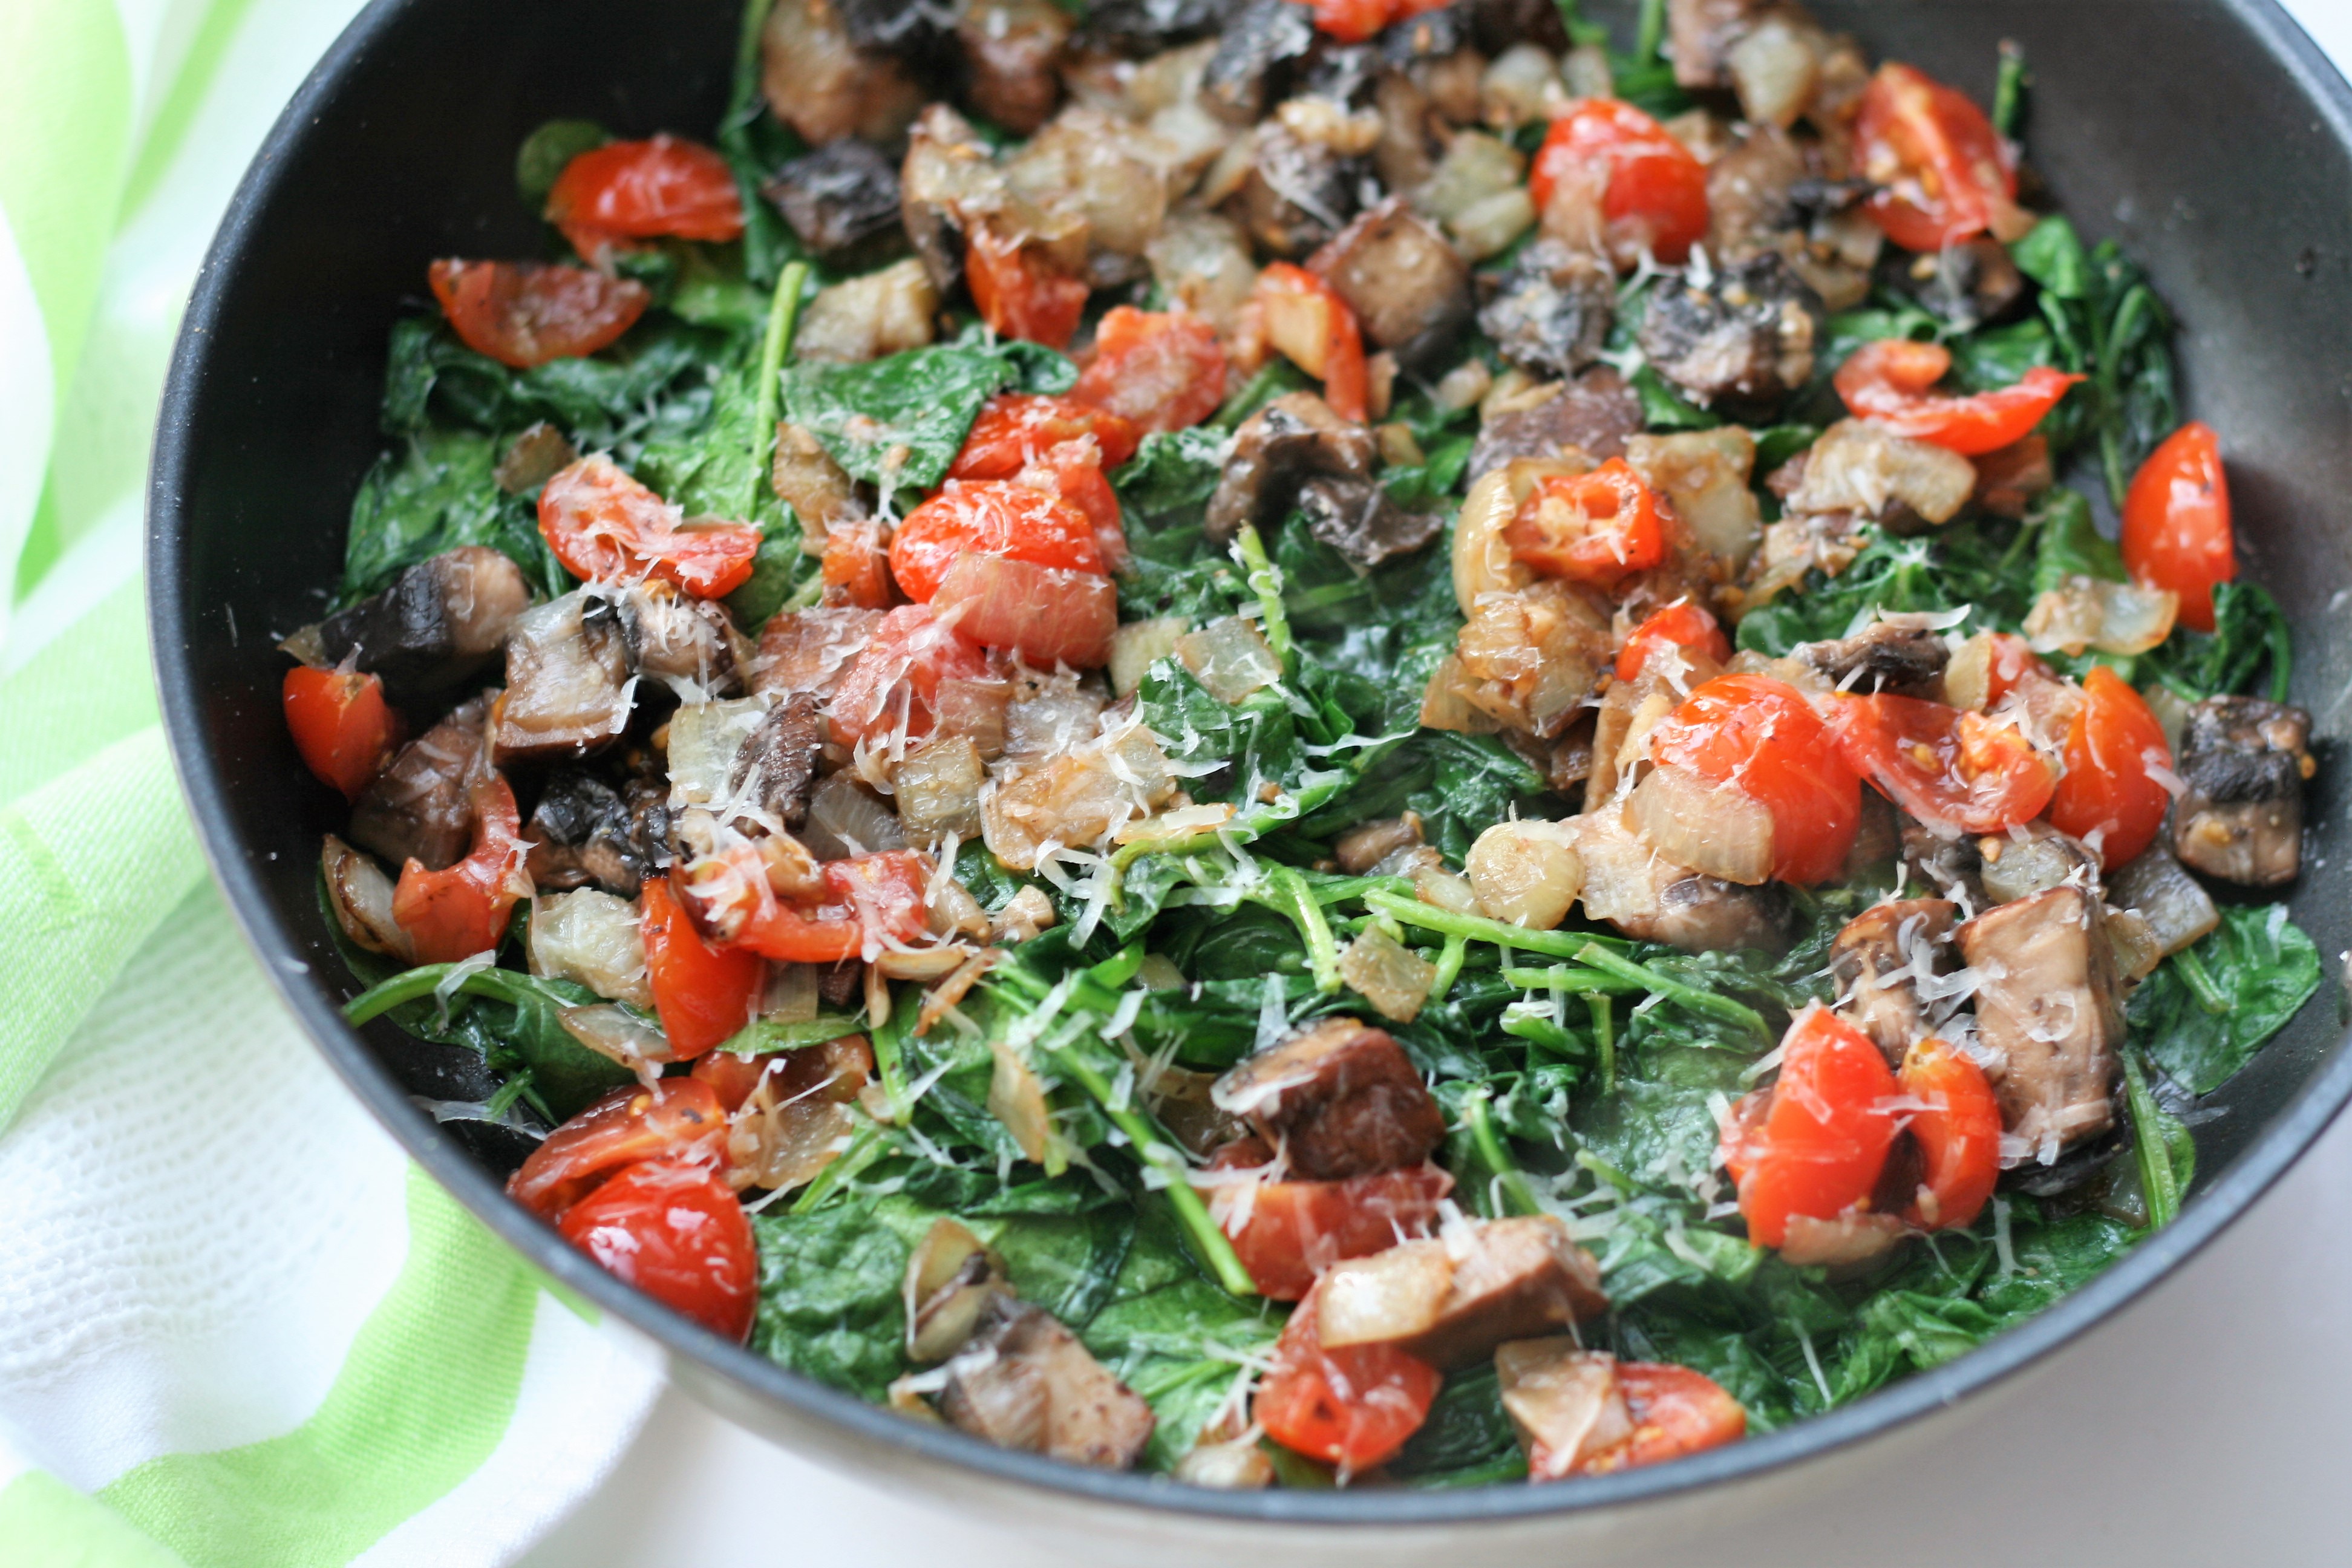 Sauteed Spinach and Mushrooms